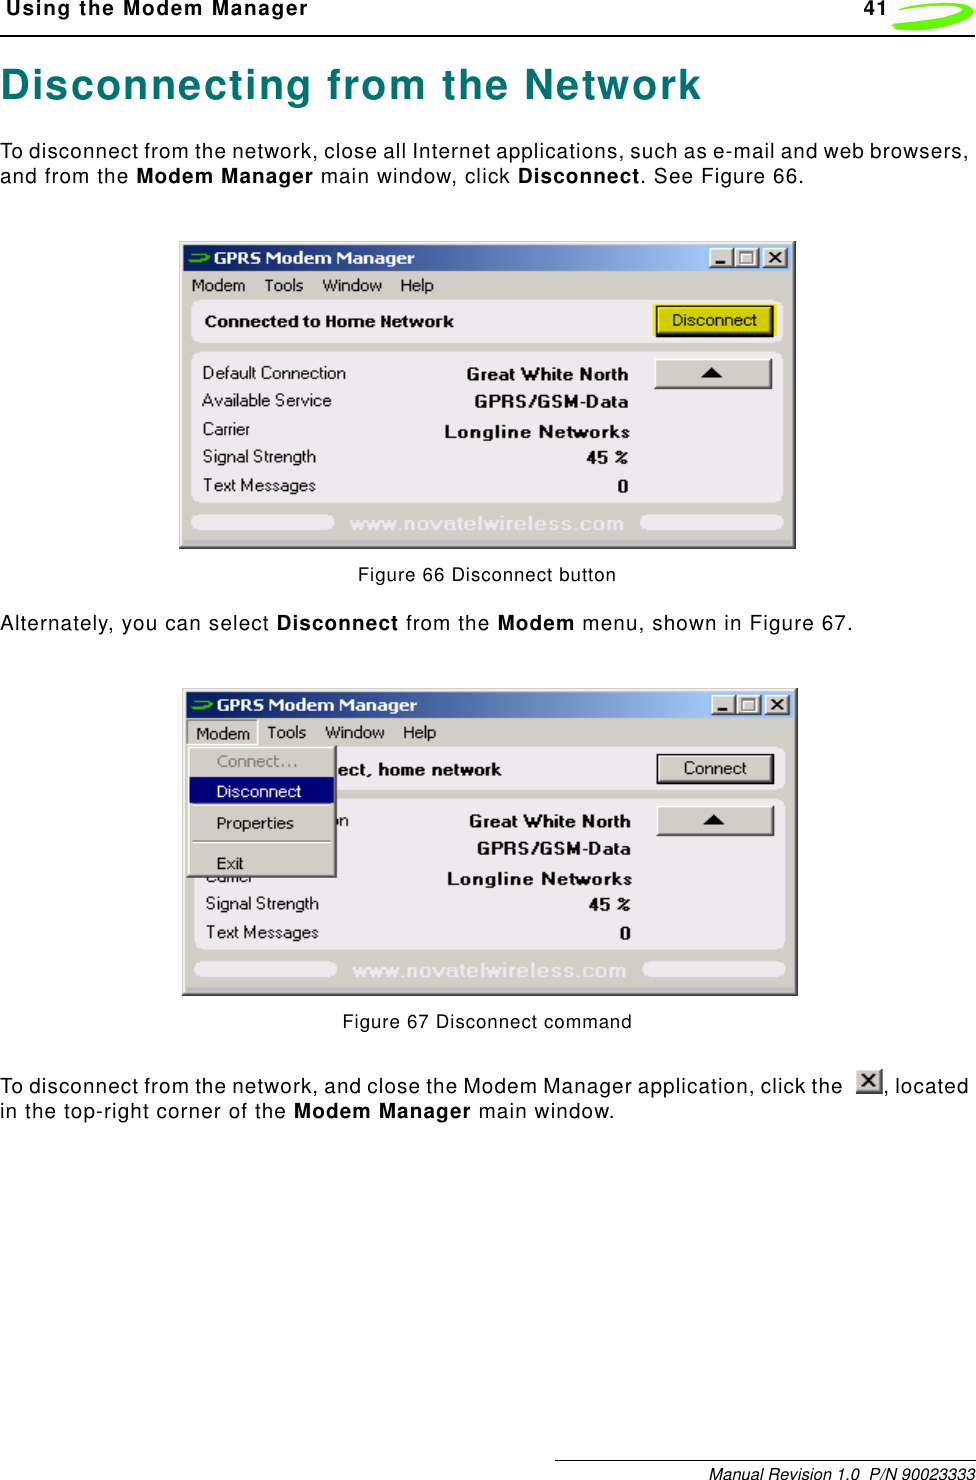  Using the Modem Manager 41Manual Revision 1.0  P/N 90023333Disconnecting from the NetworkTo disconnect from the network, close all Internet applications, such as e-mail and web browsers, and from the Modem Manager main window, click Disconnect. See Figure 66.Figure 66 Disconnect buttonAlternately, you can select Disconnect from the Modem menu, shown in Figure 67.Figure 67 Disconnect commandTo disconnect from the network, and close the Modem Manager application, click the  , located in the top-right corner of the Modem Manager main window.